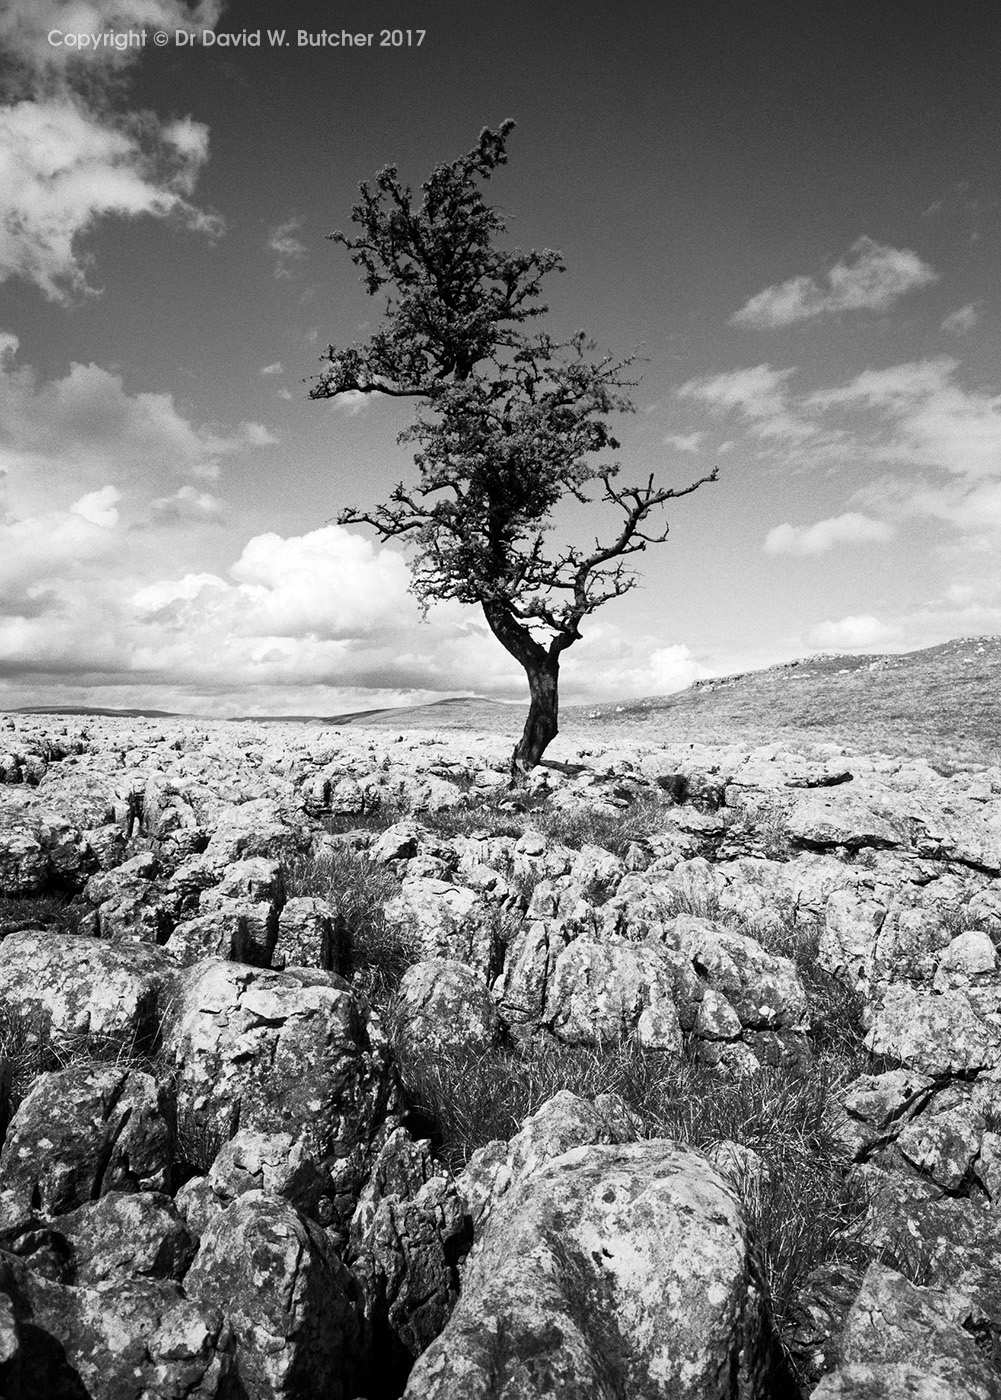 Limestone Pavement and Tree at Conistone, Wharfedale, Yorkshire